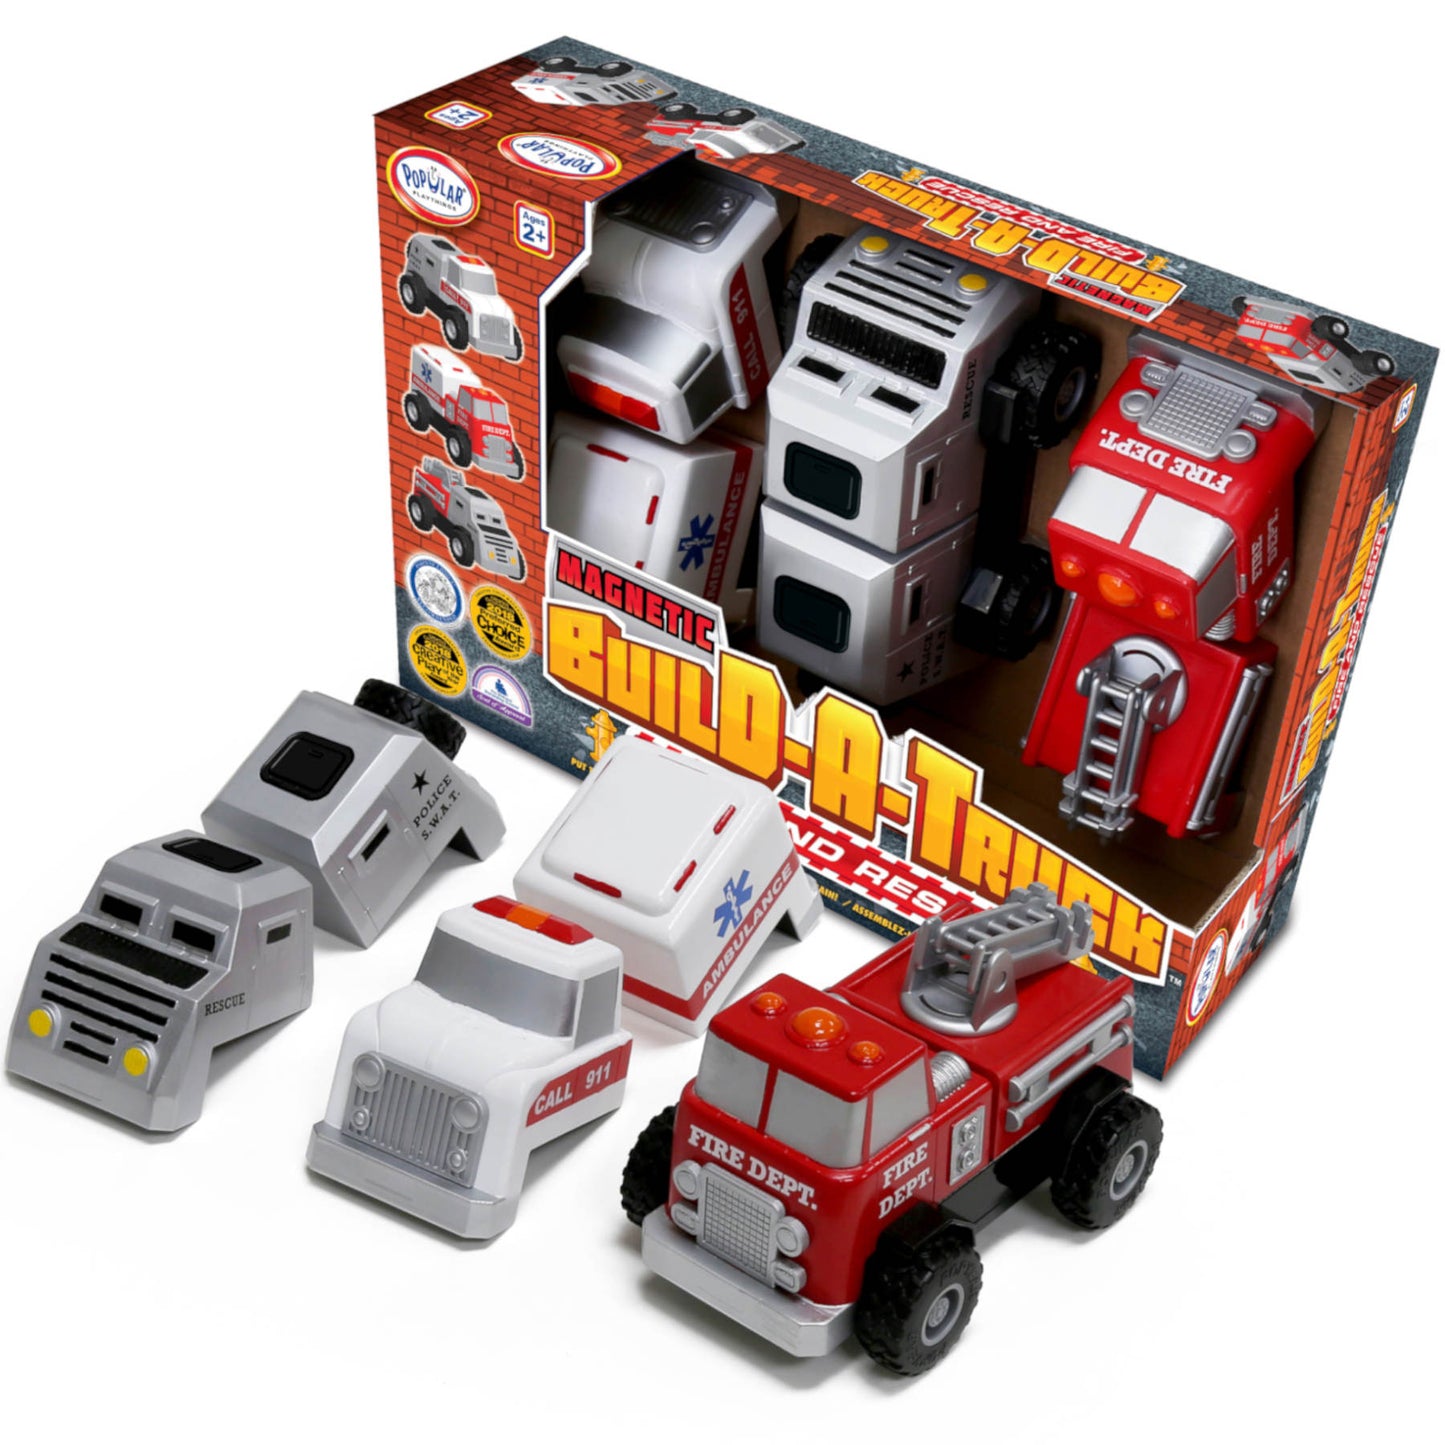 Popular Playthings Magnetic Build a Truck Emergency